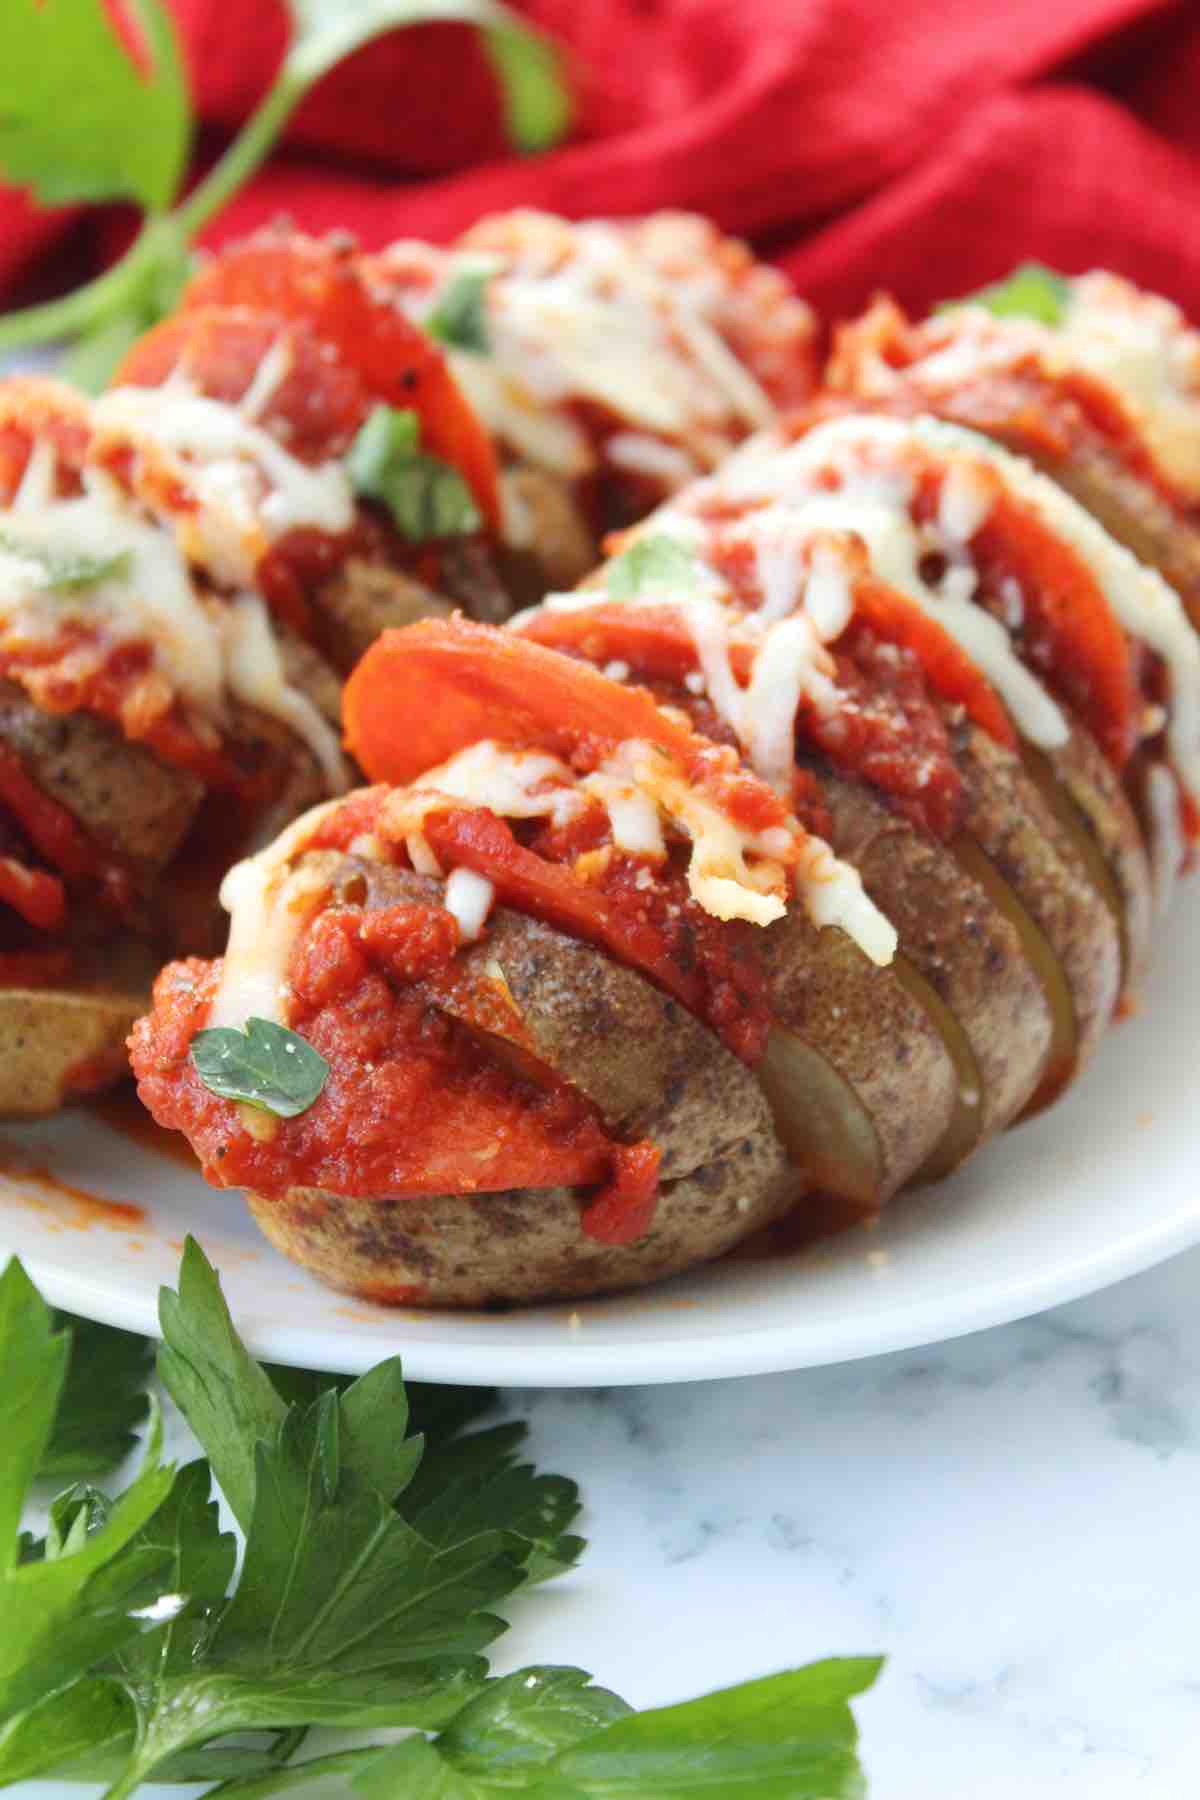 This recipe for oven baked pizza hasselback potatoes is easy and perfect for a weeknight meal.